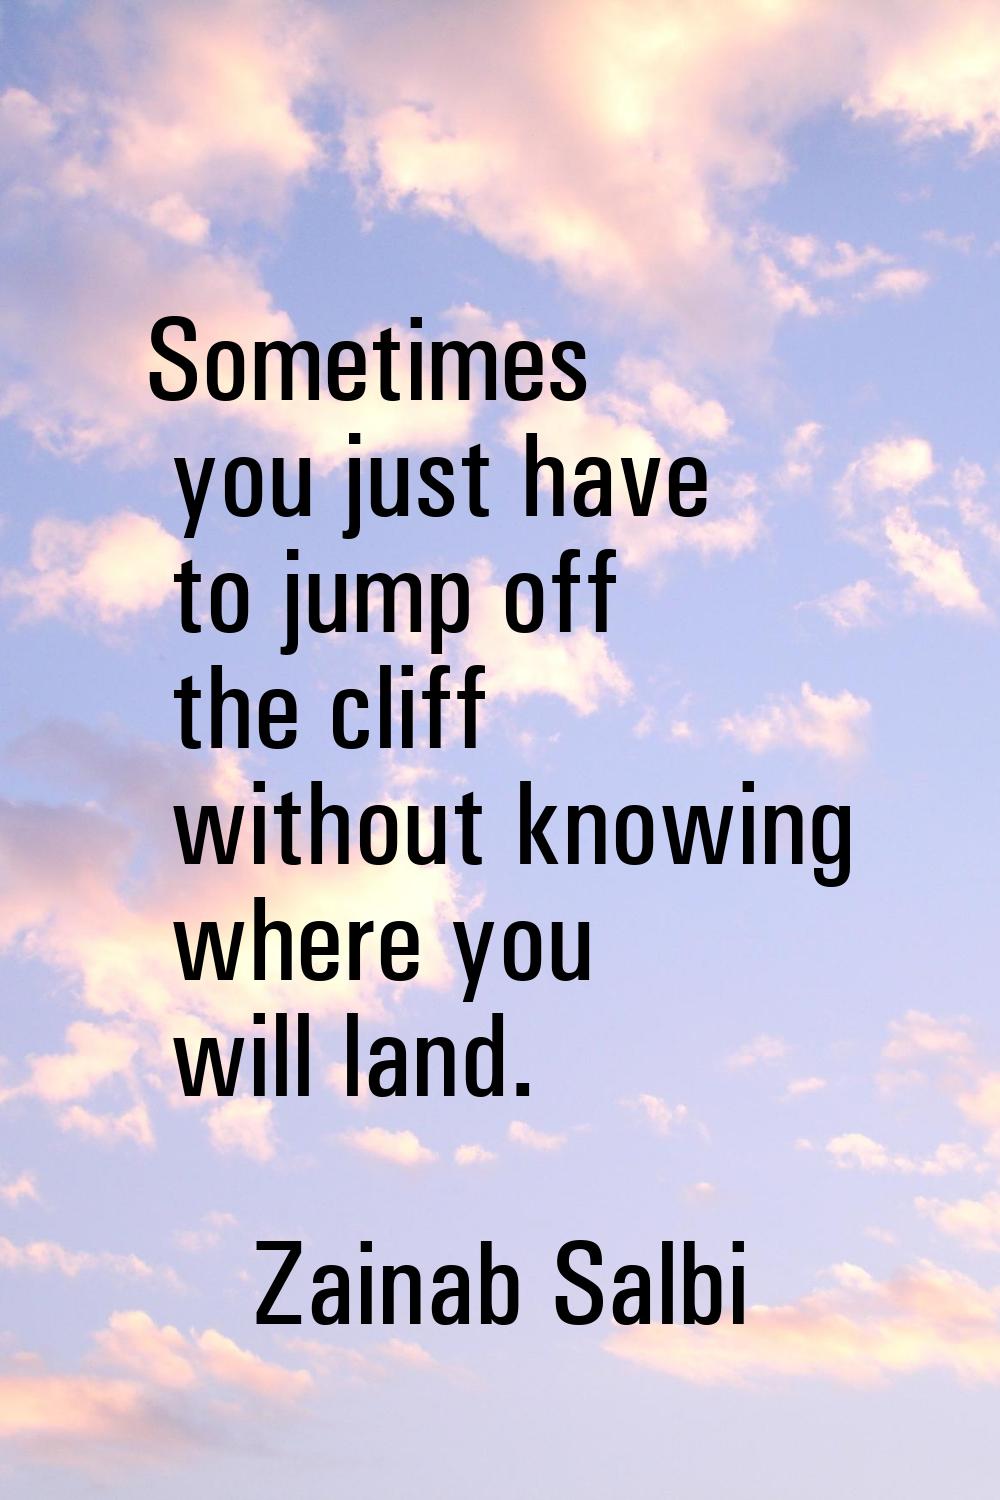 Sometimes you just have to jump off the cliff without knowing where you will land.